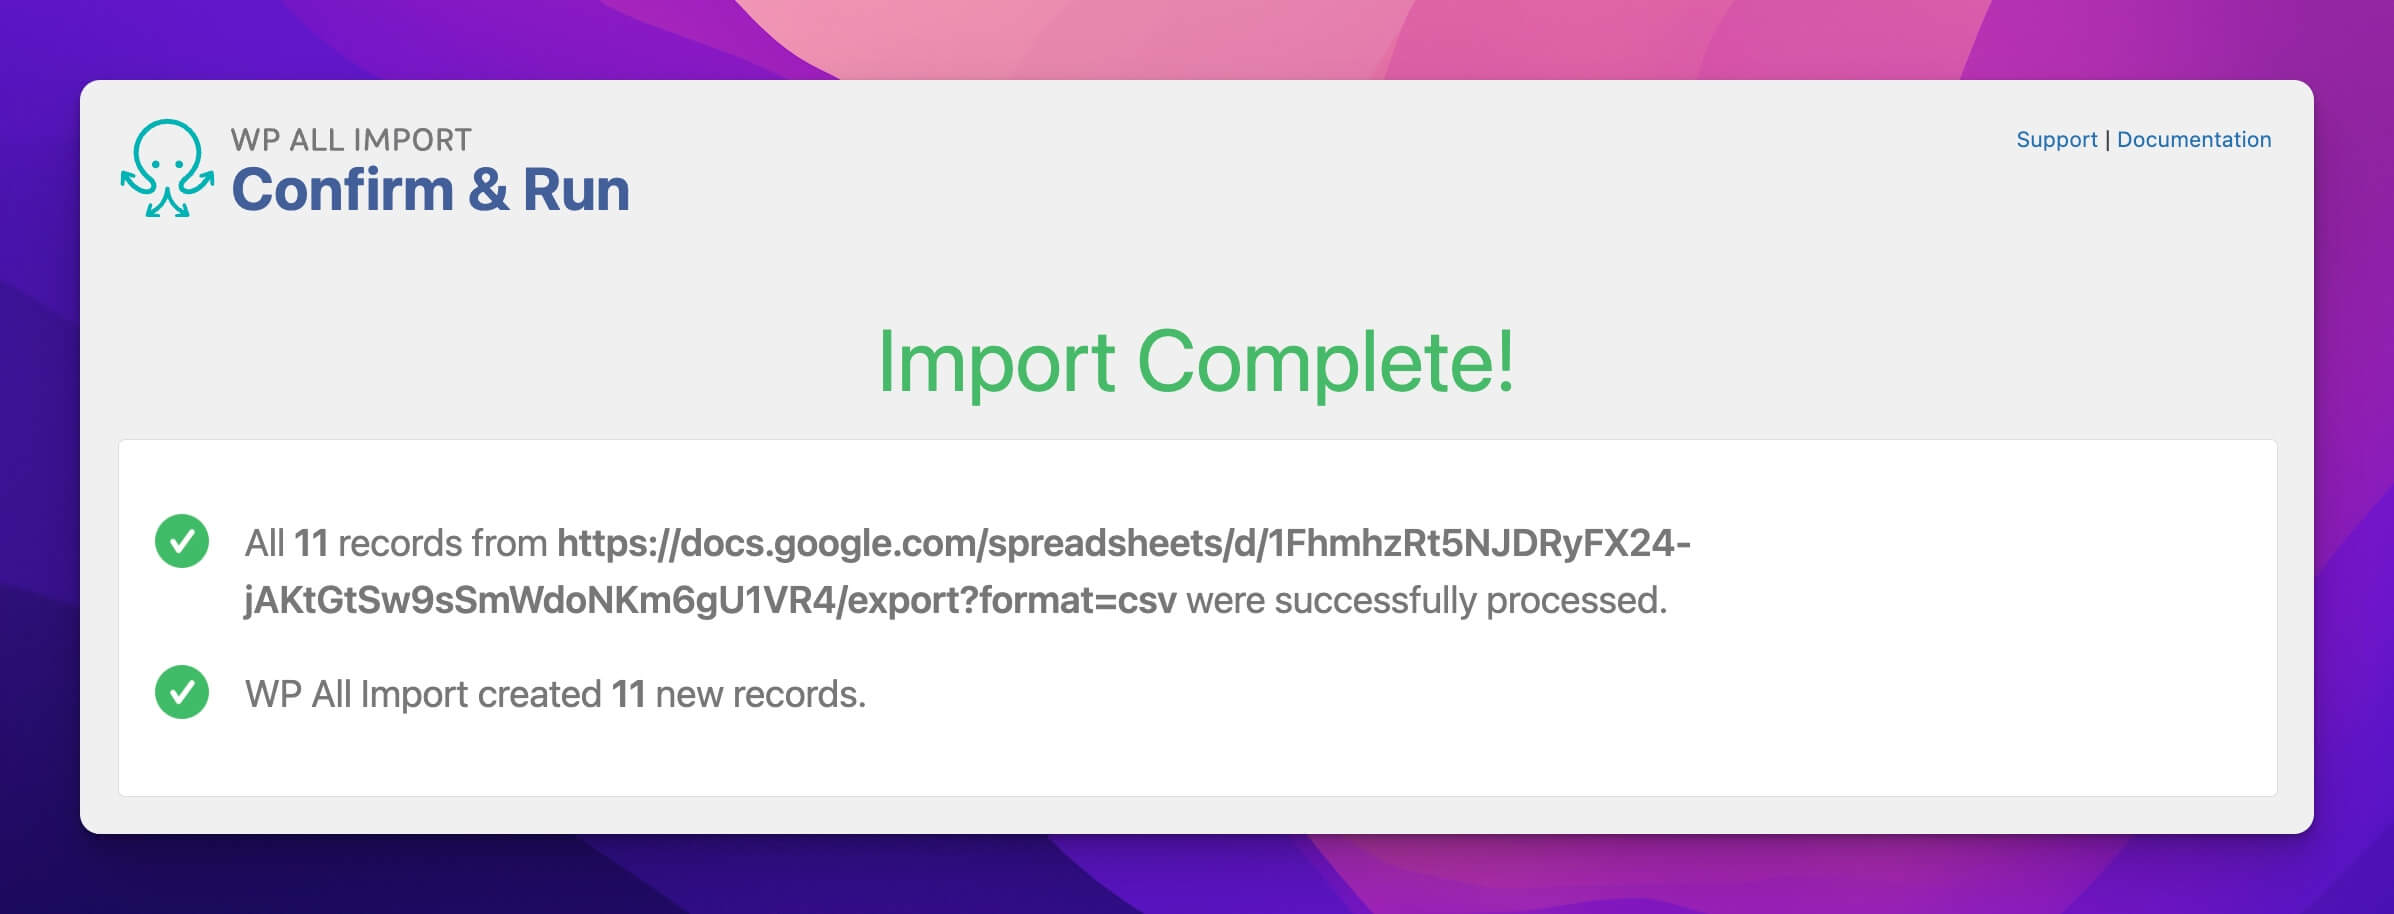 Import Complete Screen for WP All Import